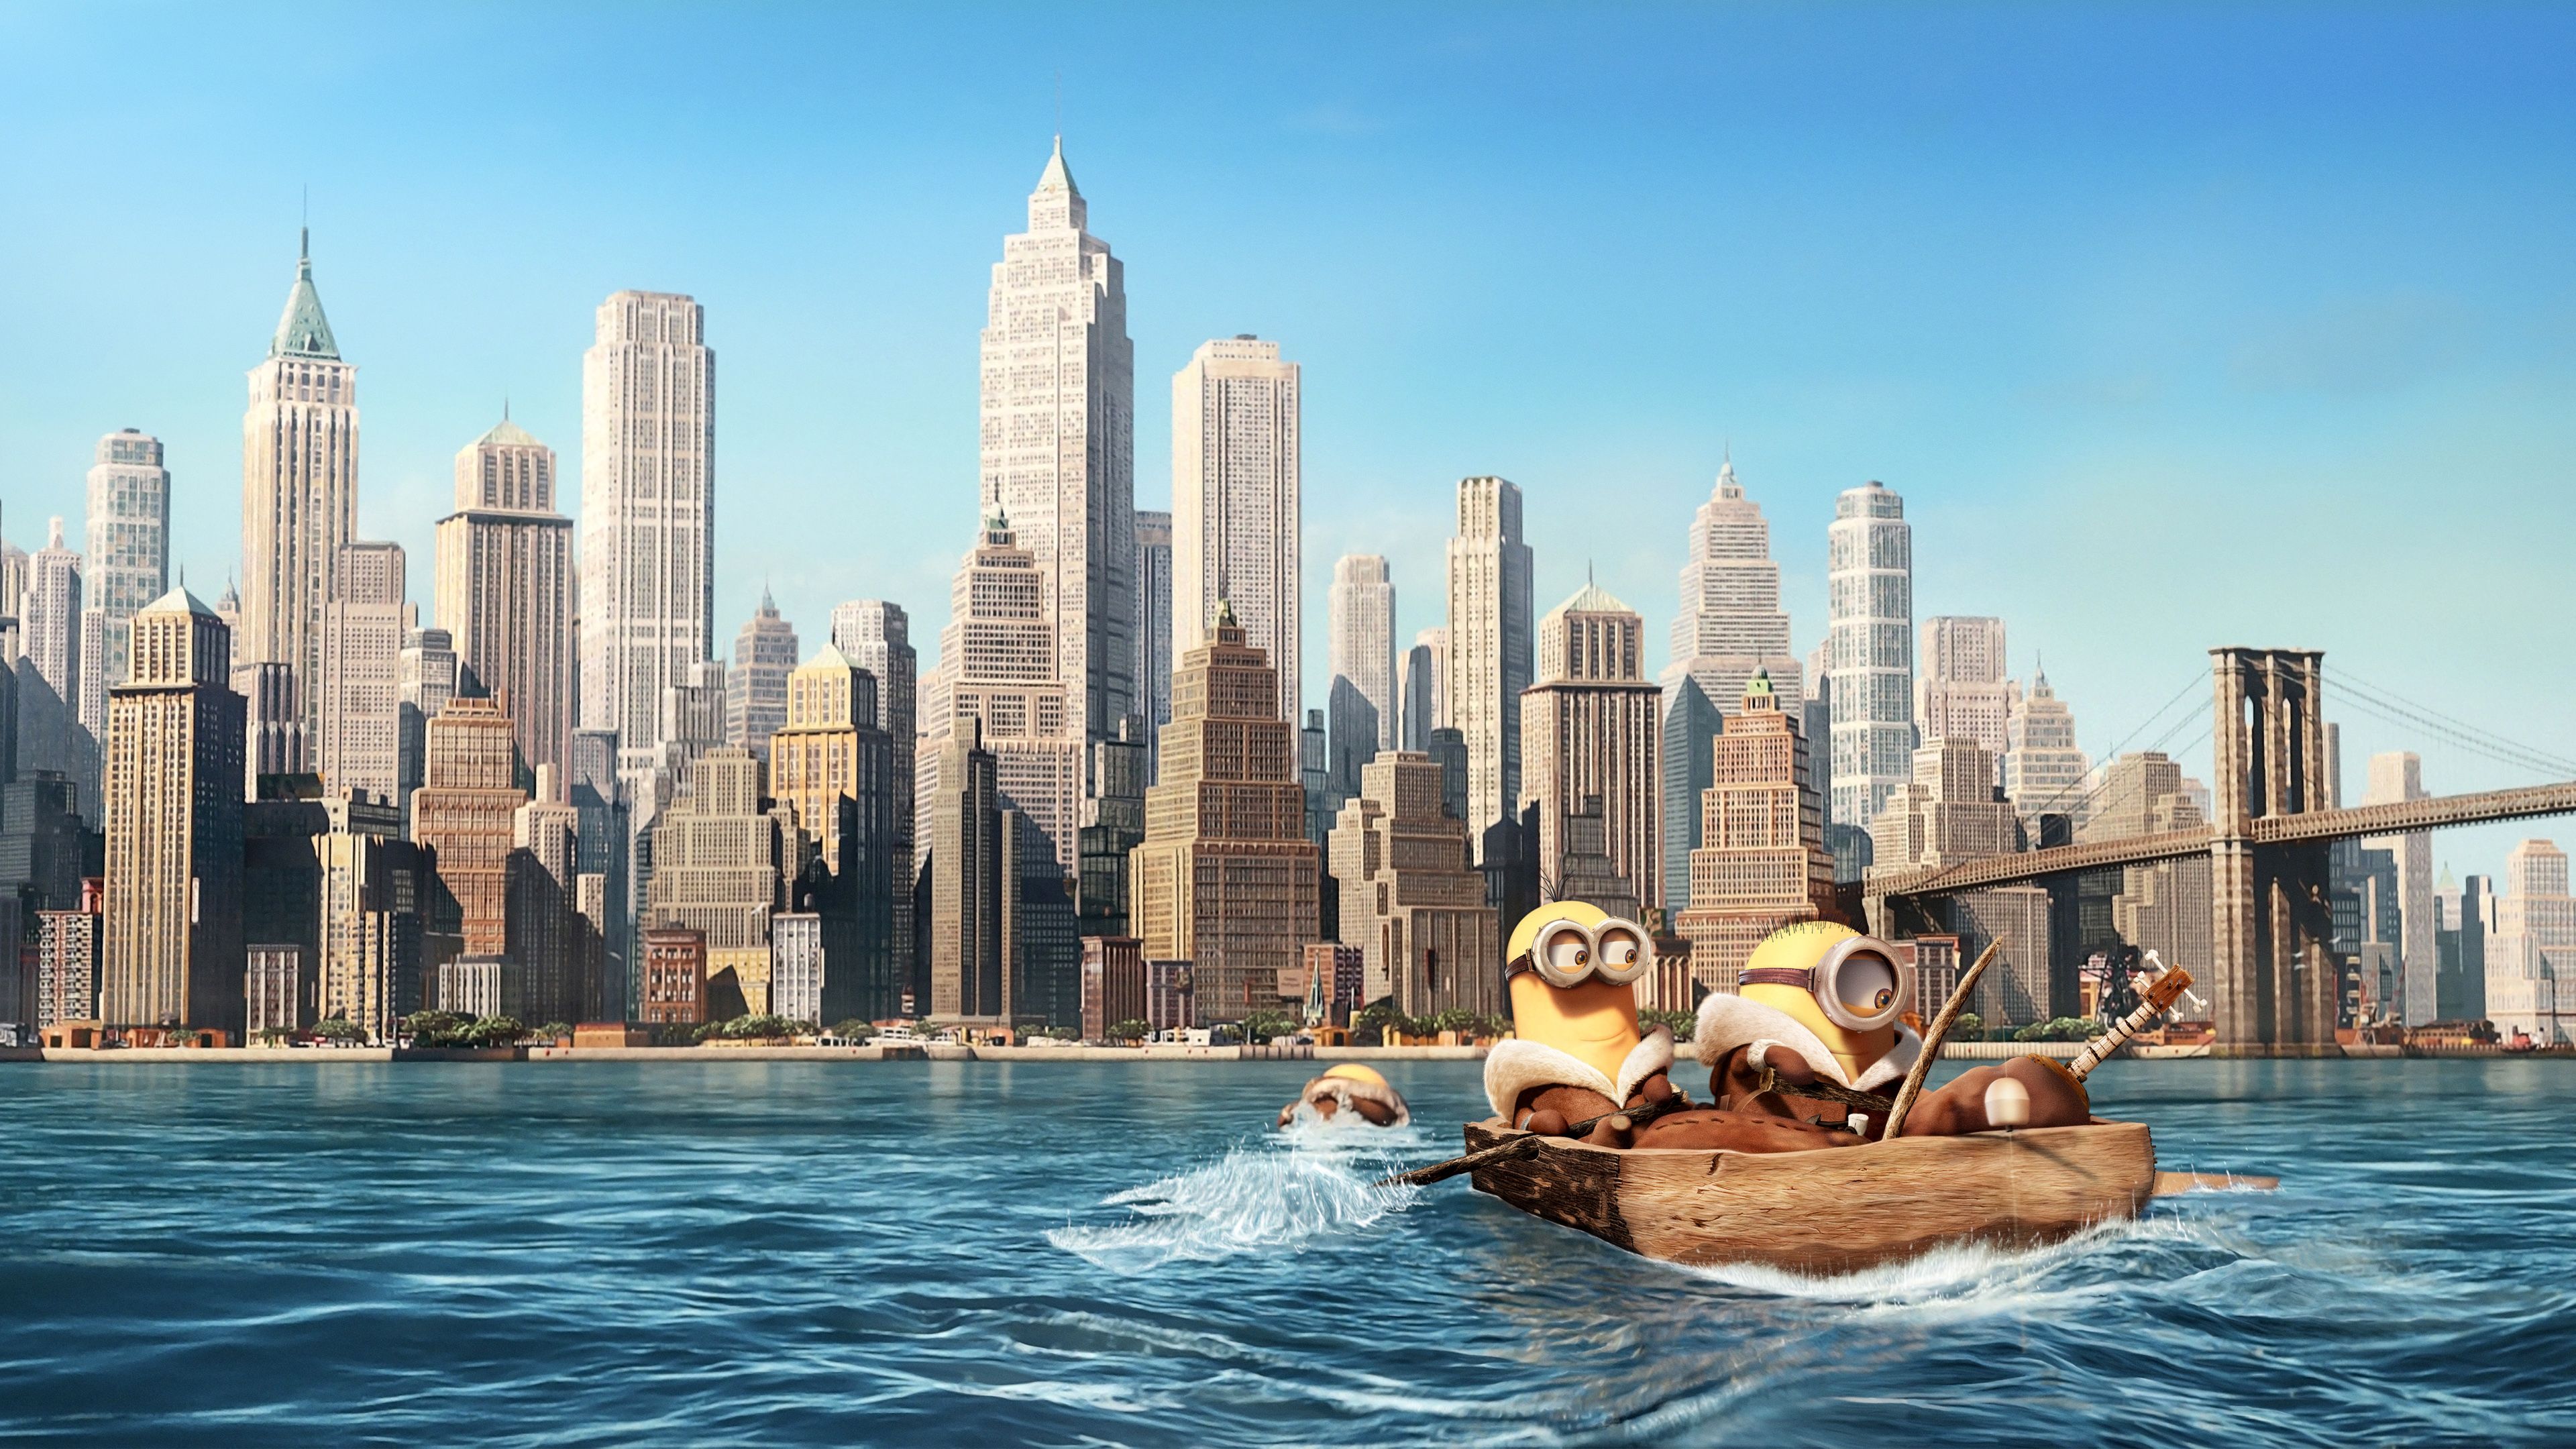 Minions in New York Ultra HD Wallpaper free desktop background and wallpaper